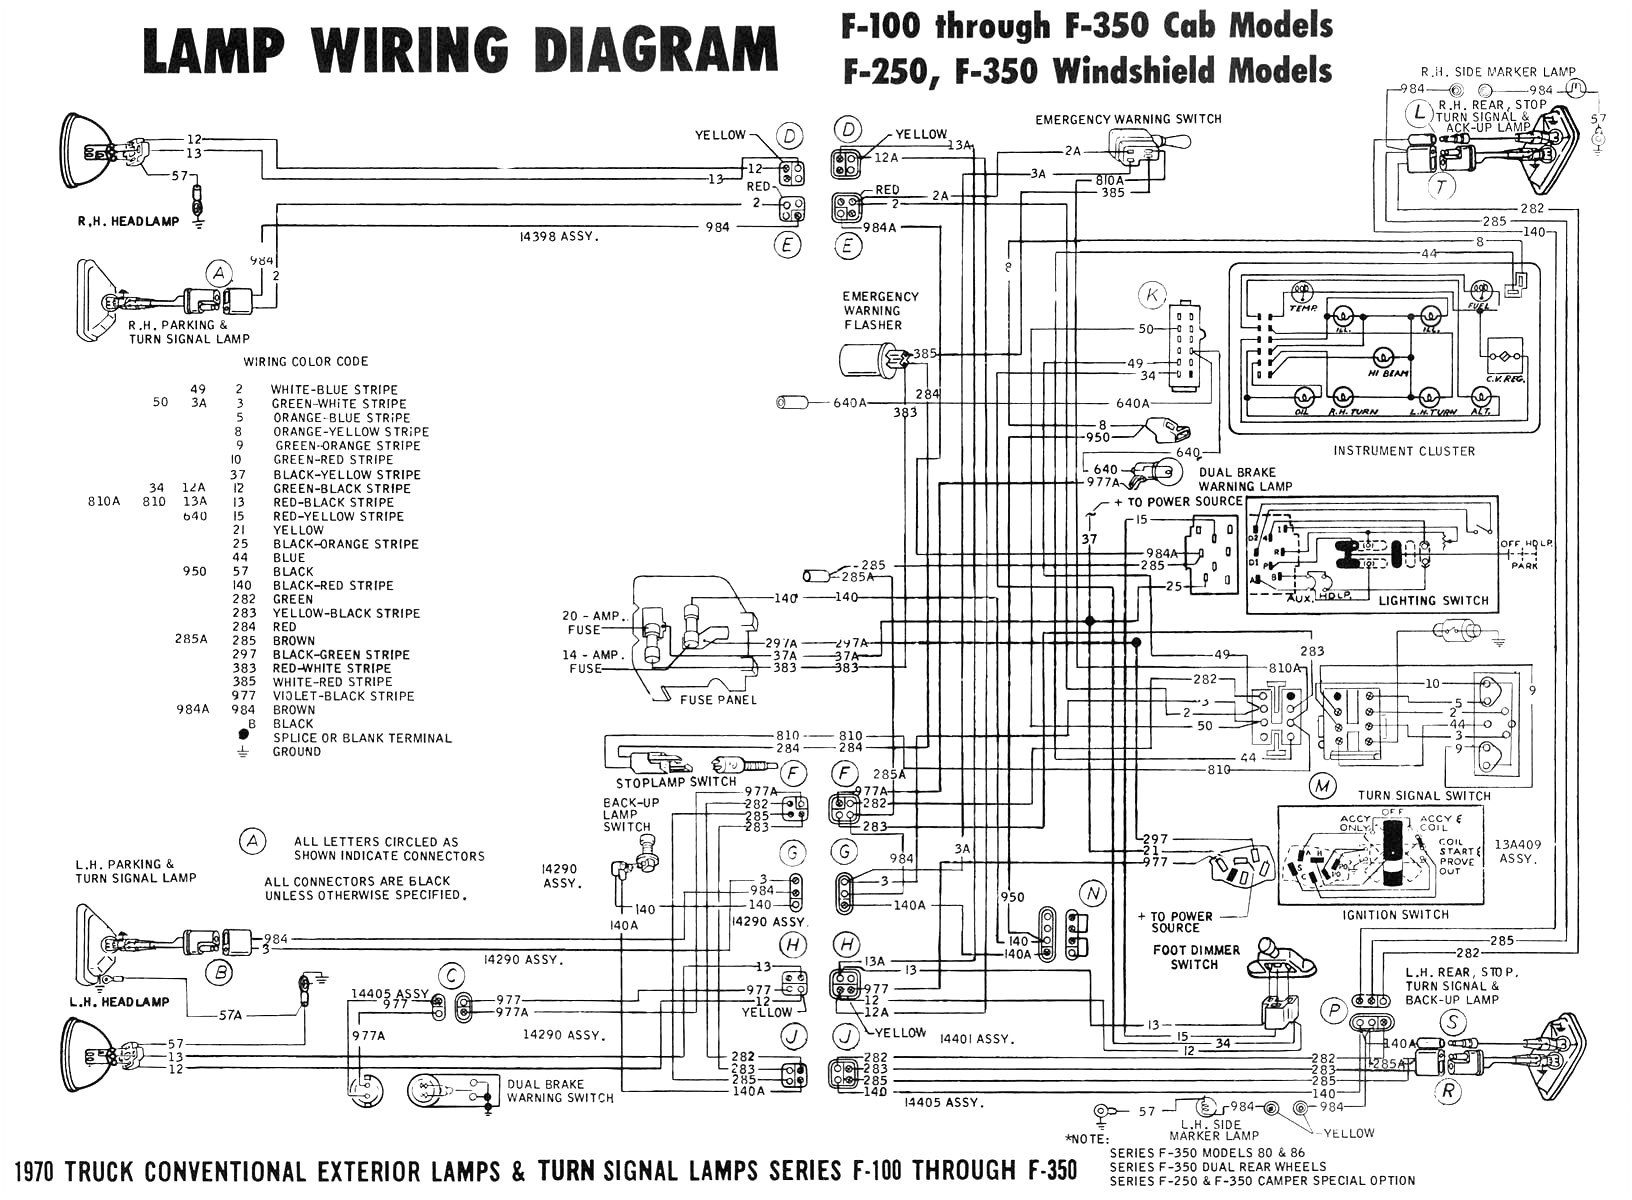 fuse diagram 1994 ford ranger autos post wiring diagram blog diagram for 1994 ford ranger radio along with 2004 ford f350 fuse